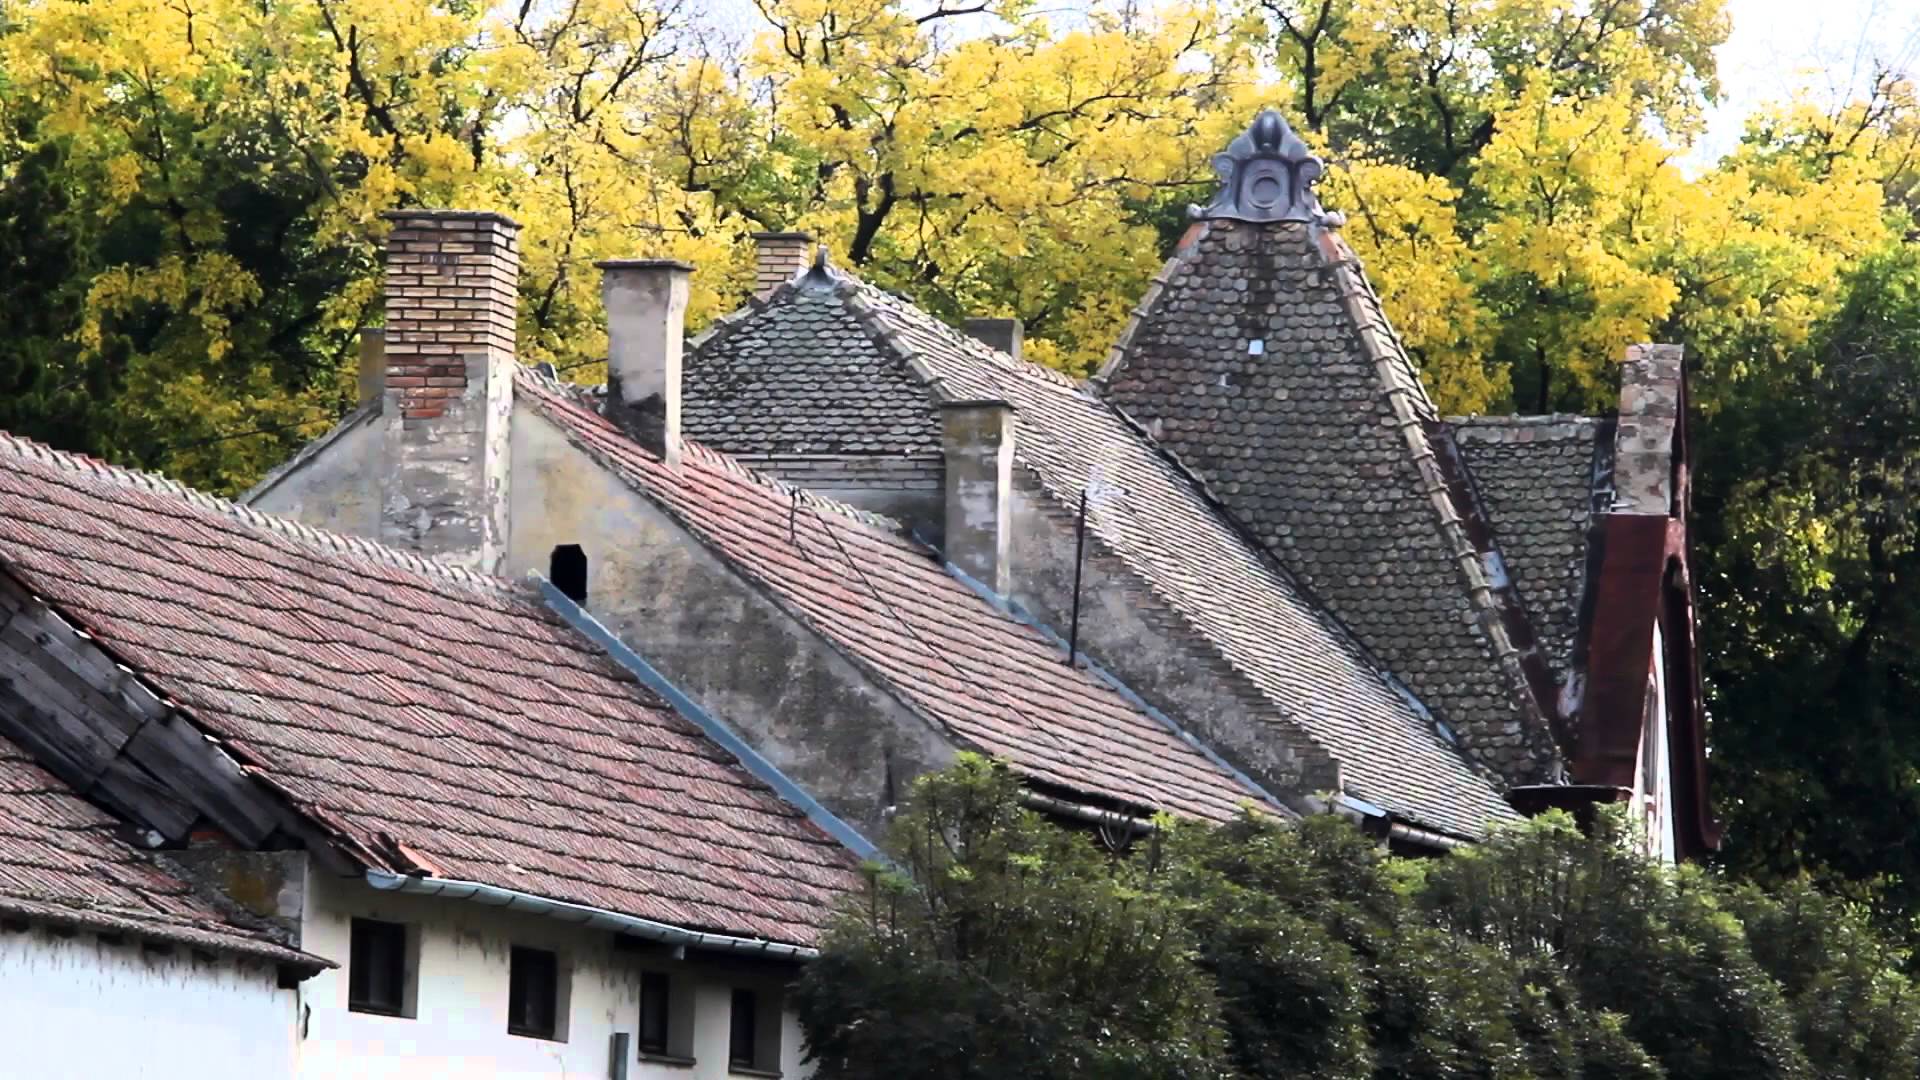 Old House Roof Video Clip Free Stock Footage Travel Videos